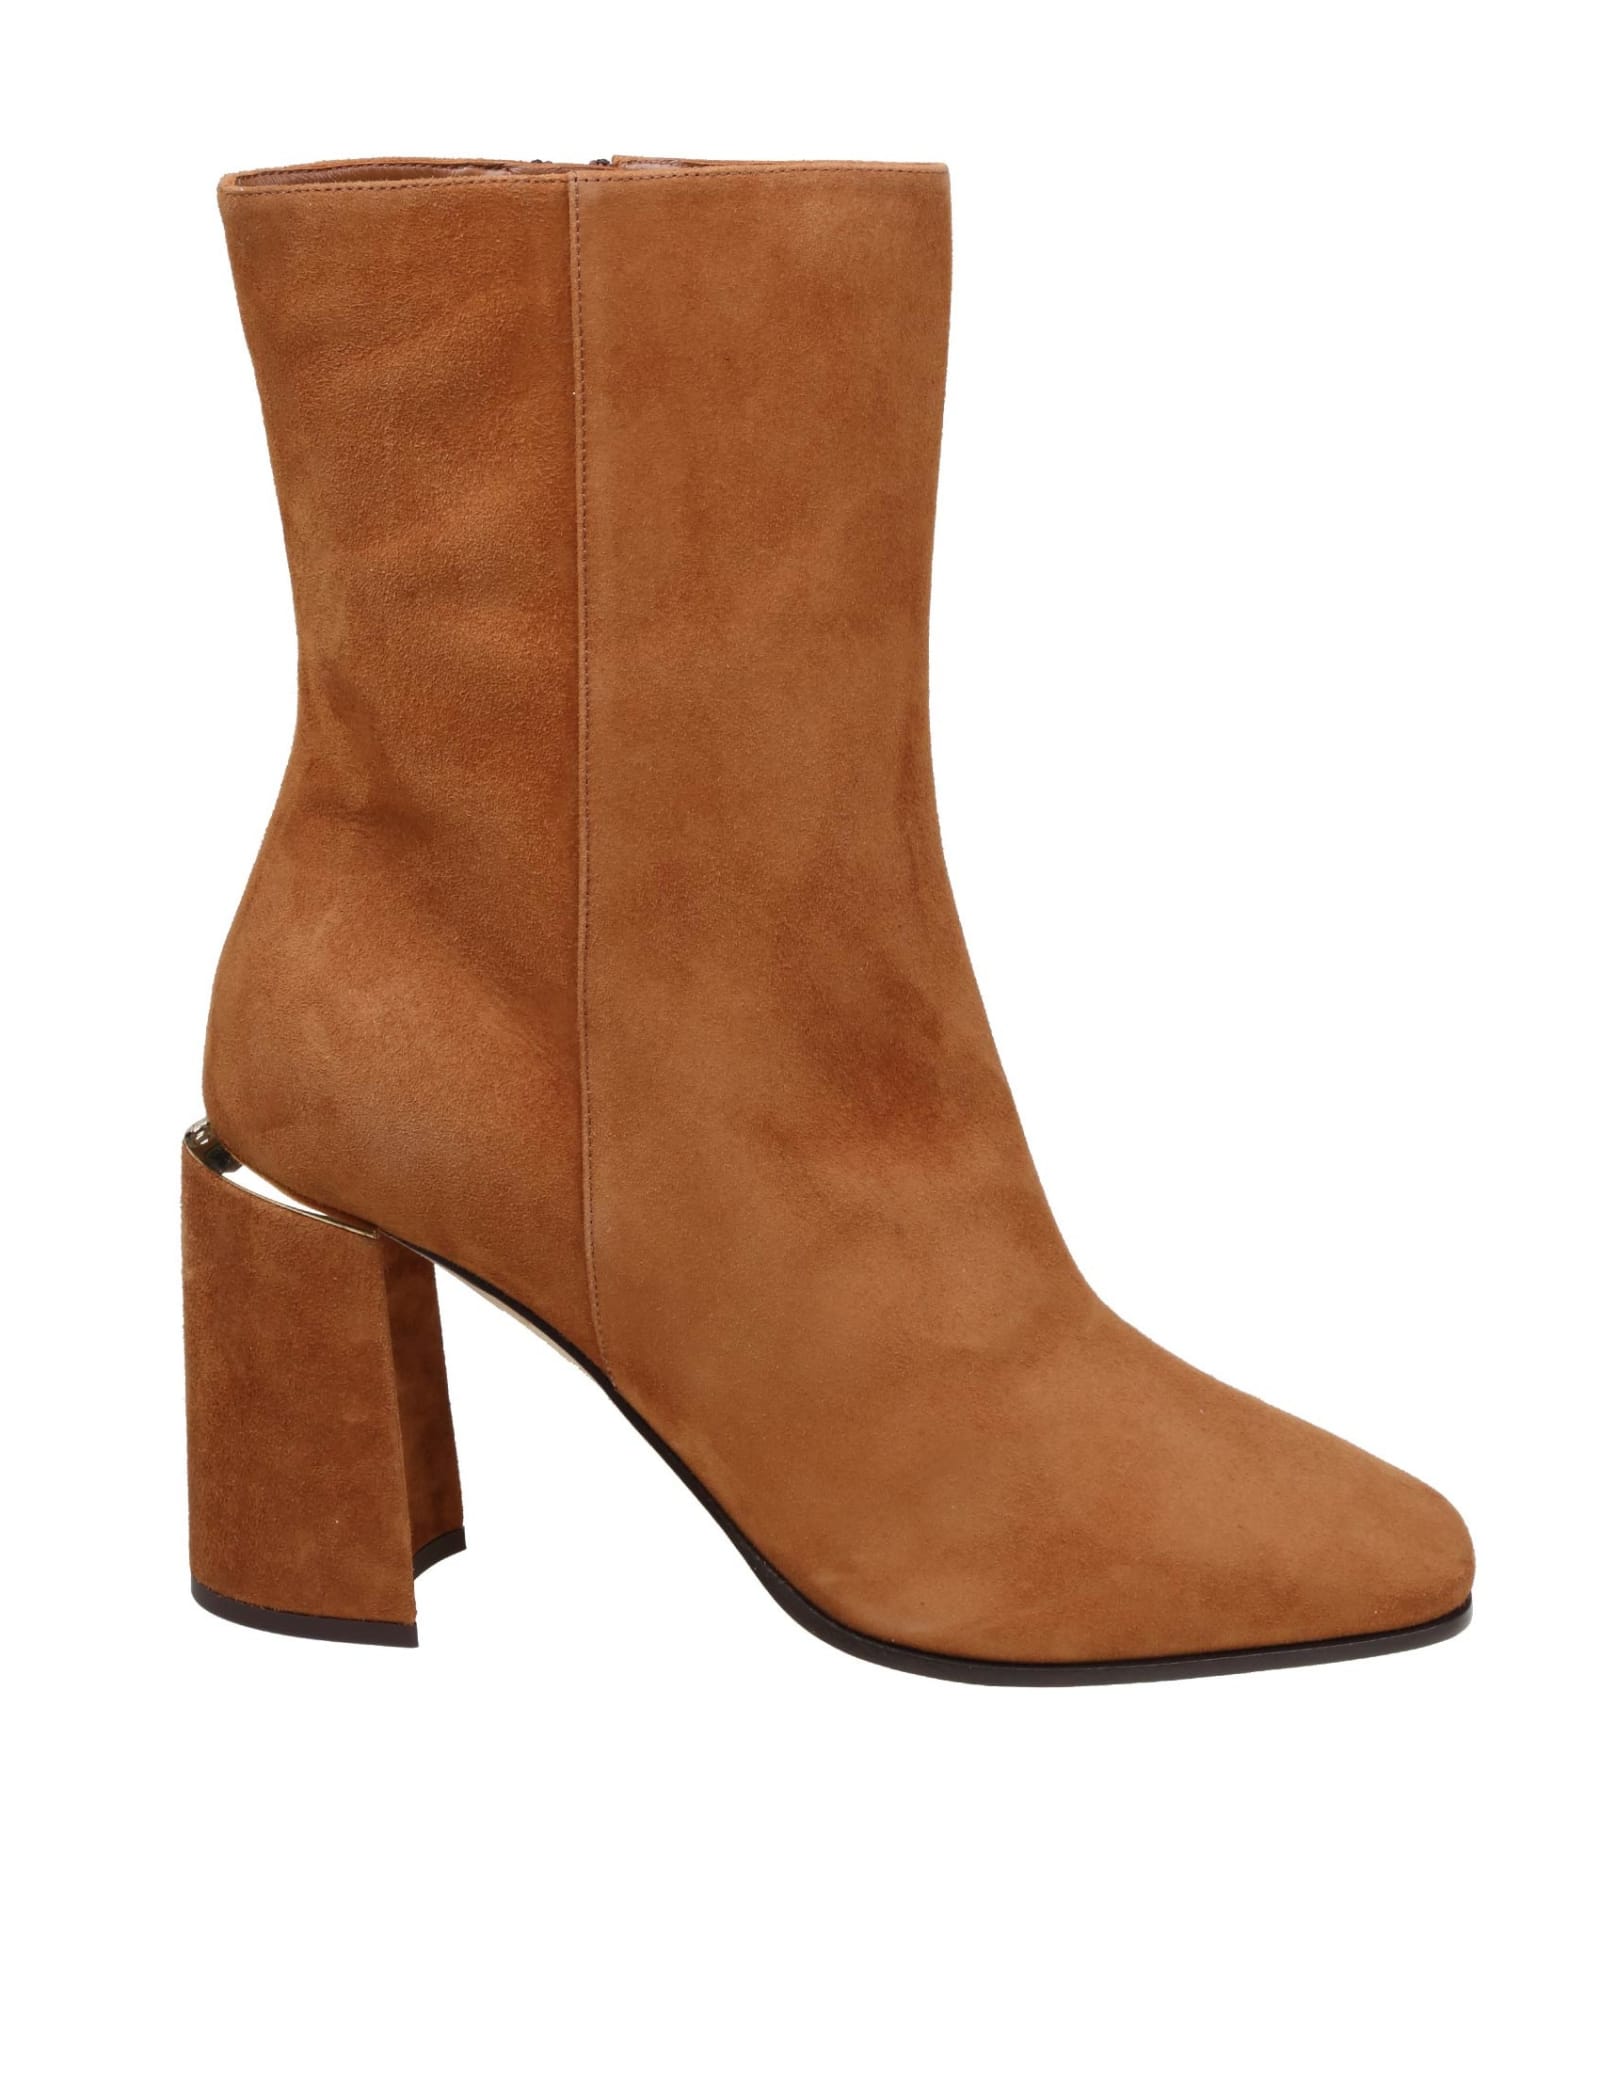 JIMMY CHOO LOREN AB 85 ANKLE BOOTS IN TAN colour SUEDE